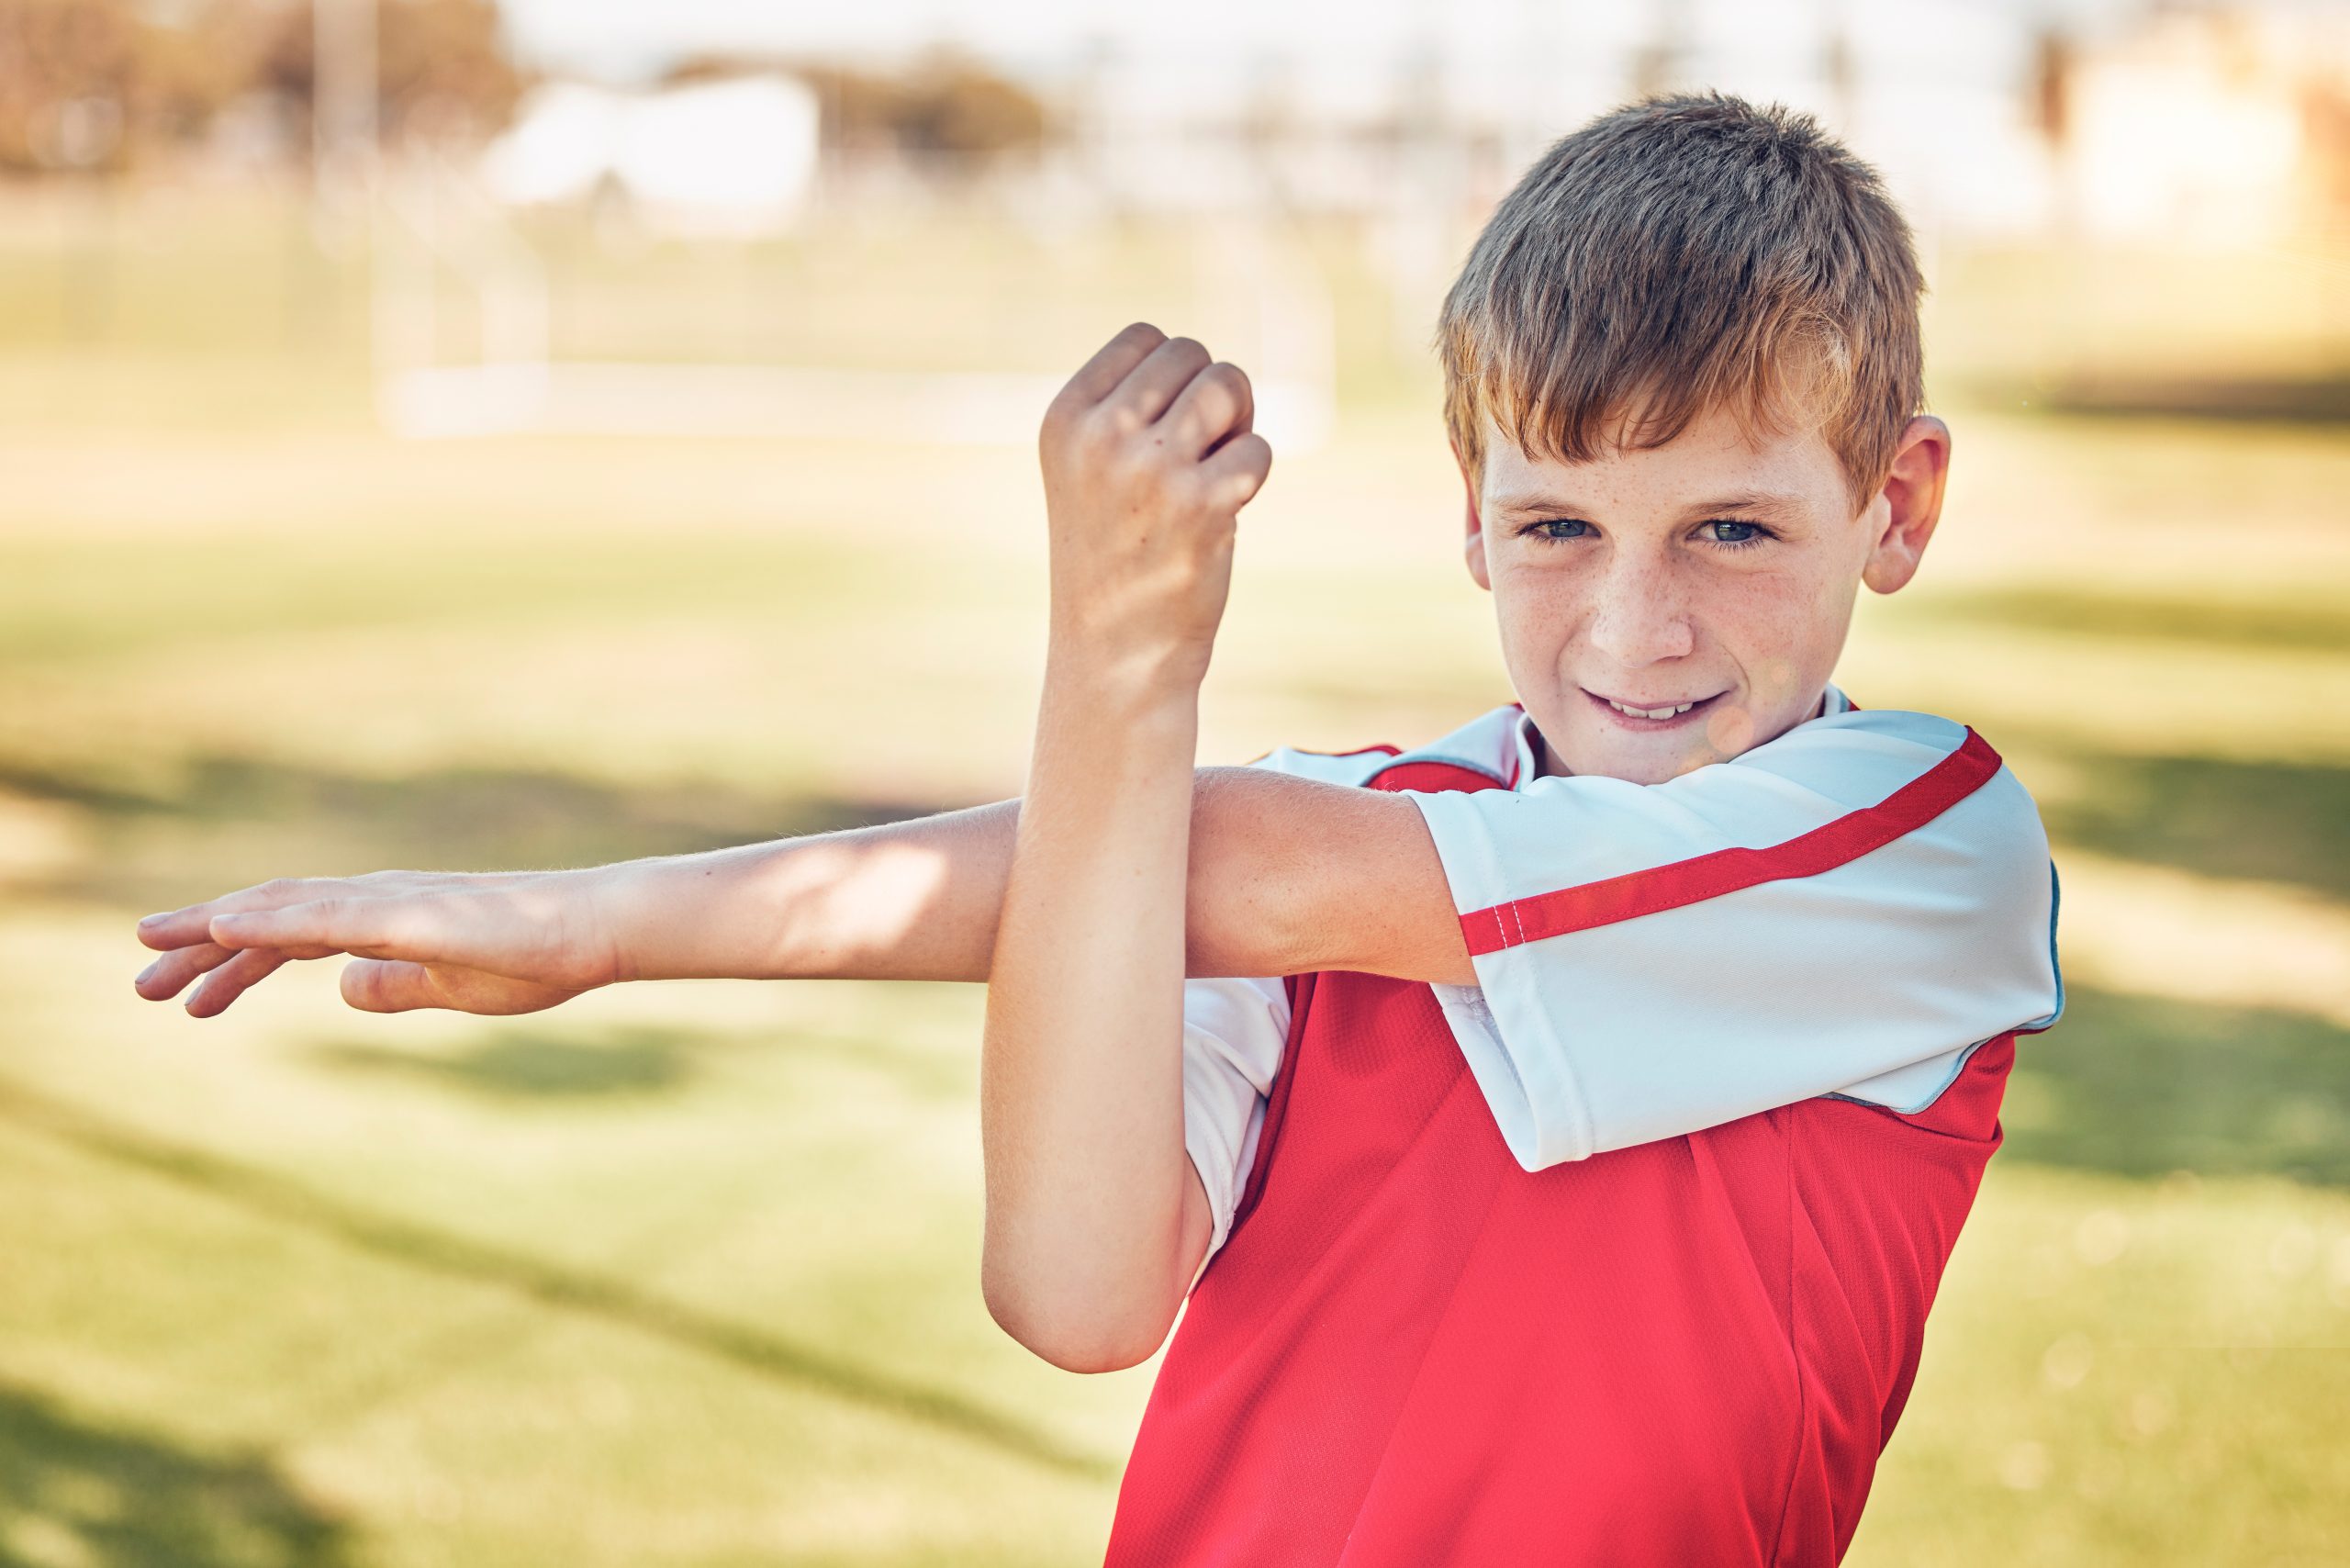 shoulder overuse injuries in youth sports